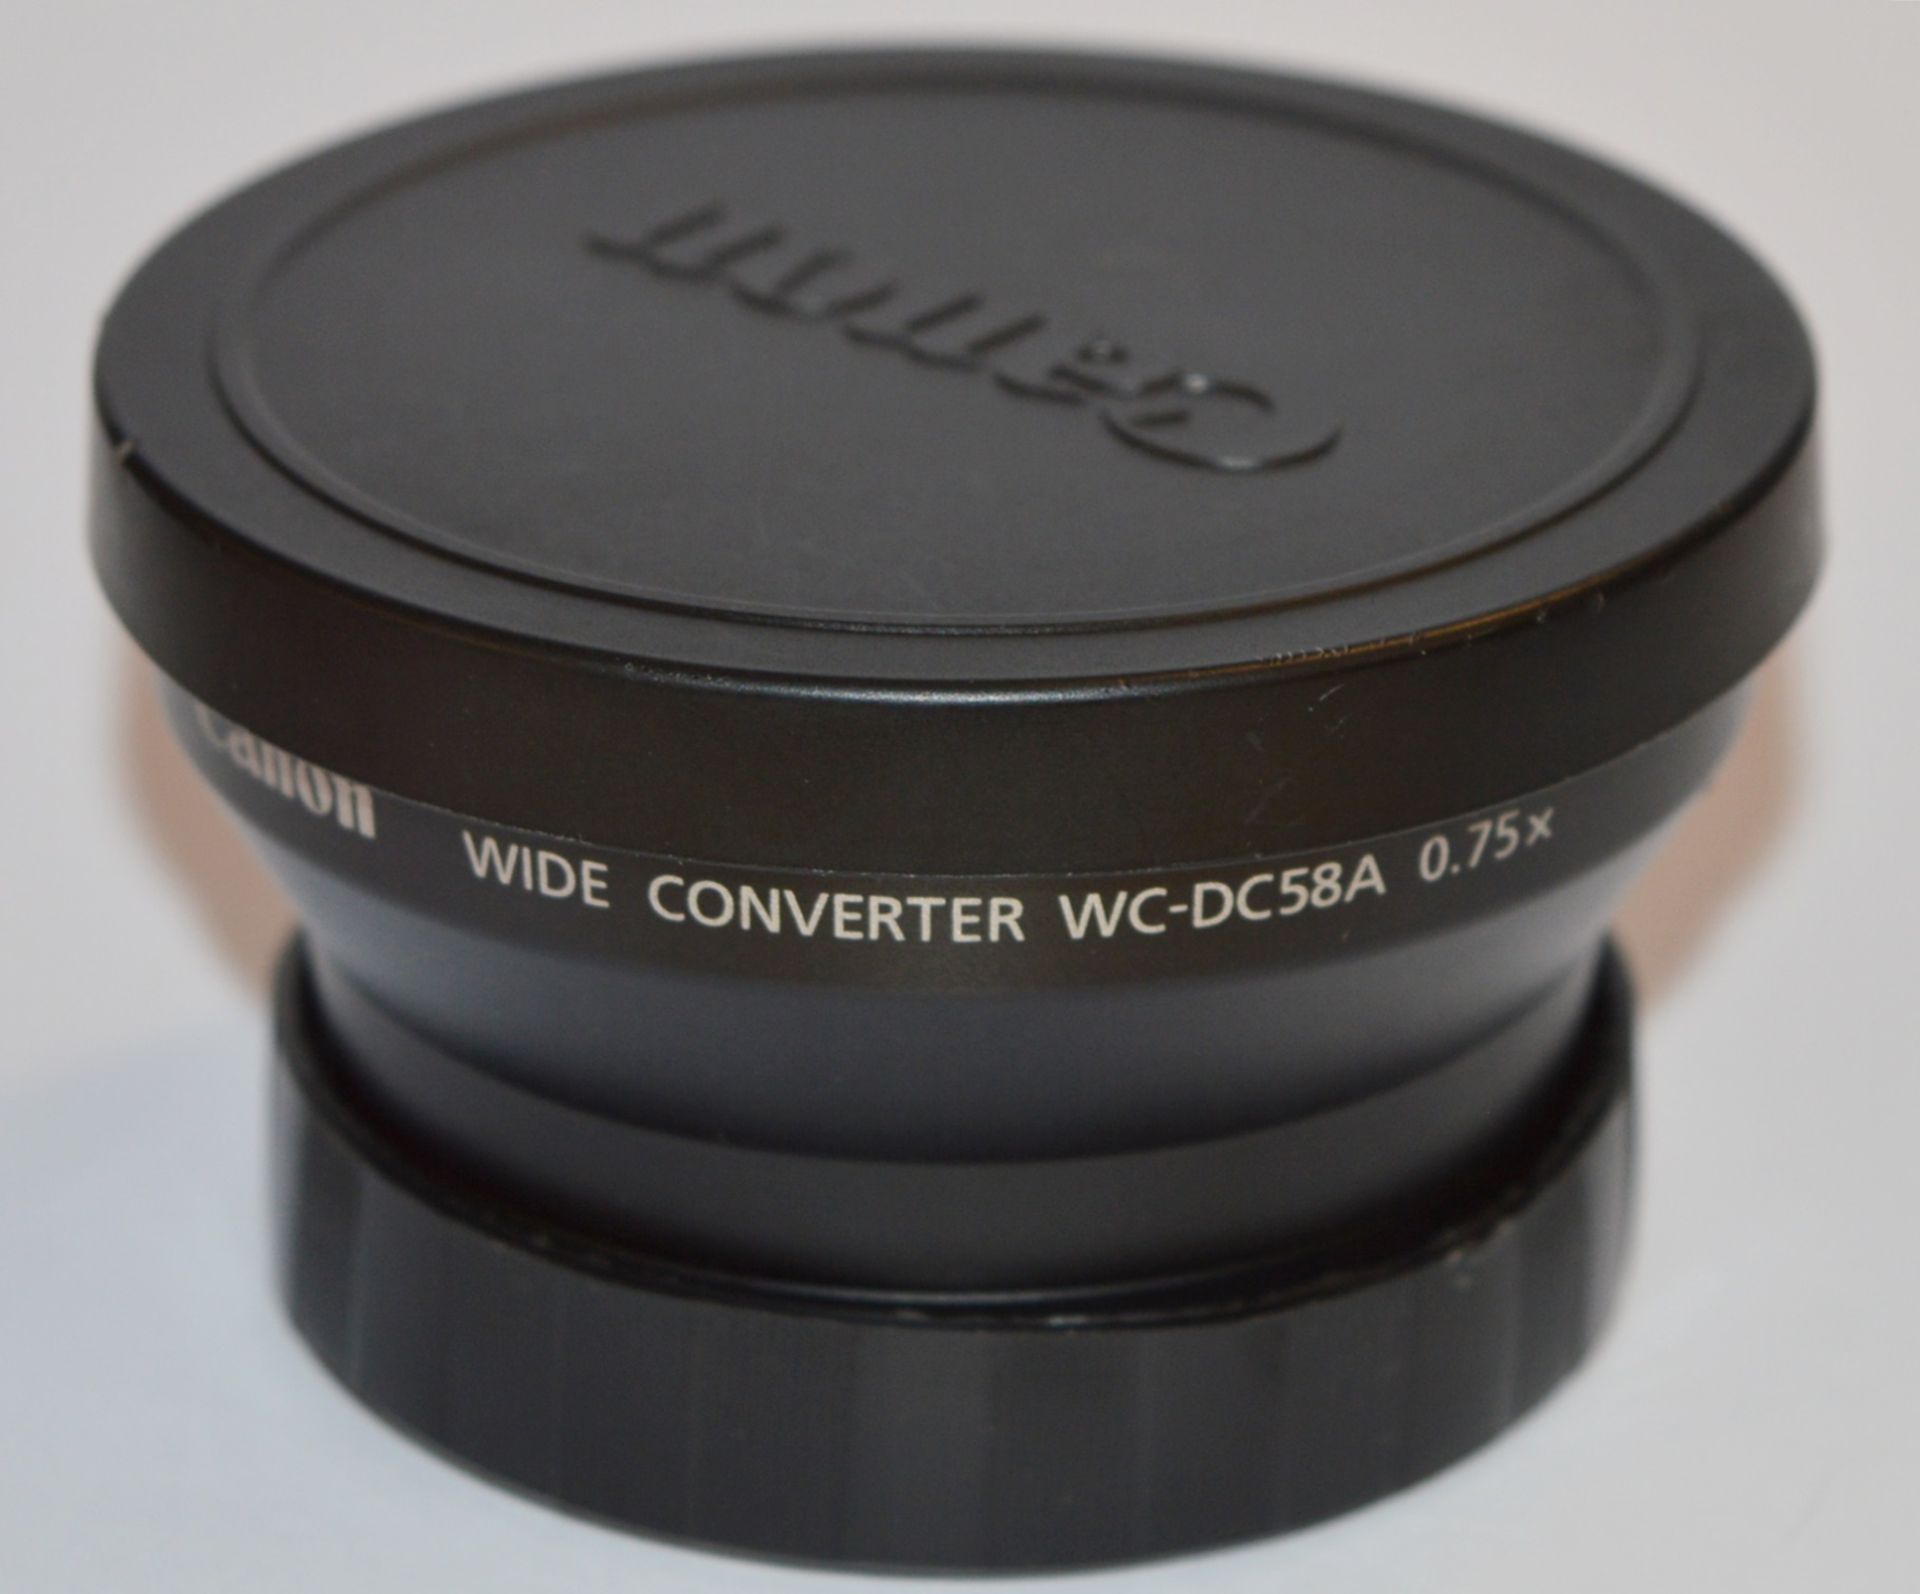 1 x Canon WC-DC58A 0.75x Wide Angle Converter Lens - CL011 - Ref JP137 - Very Good Condition - - Image 2 of 6